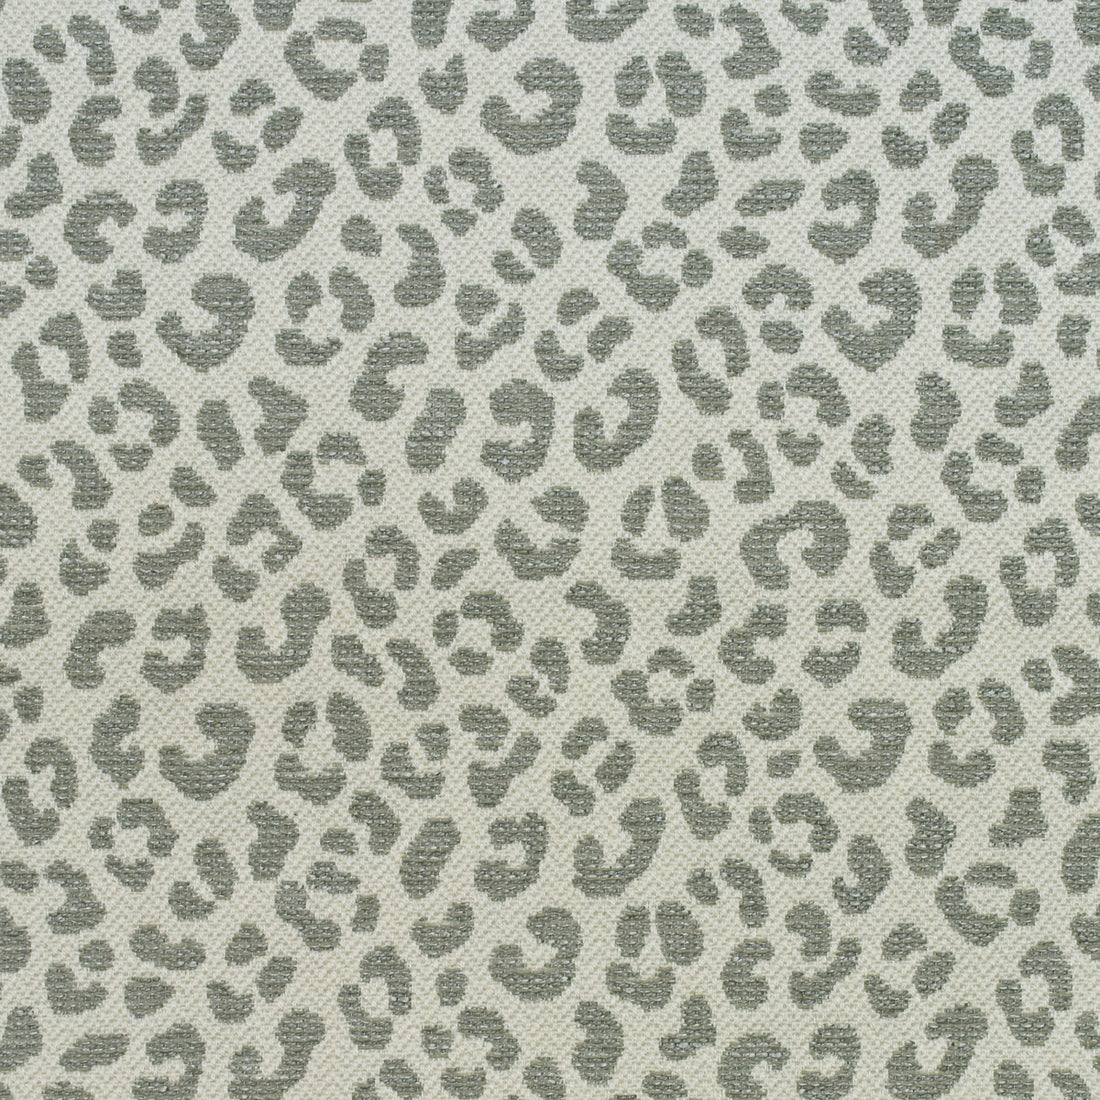 Wildcat fabric in storm color - pattern AM100400.11.0 - by Kravet Couture in the Andrew Martin Woodland By Sophie Paterson collection